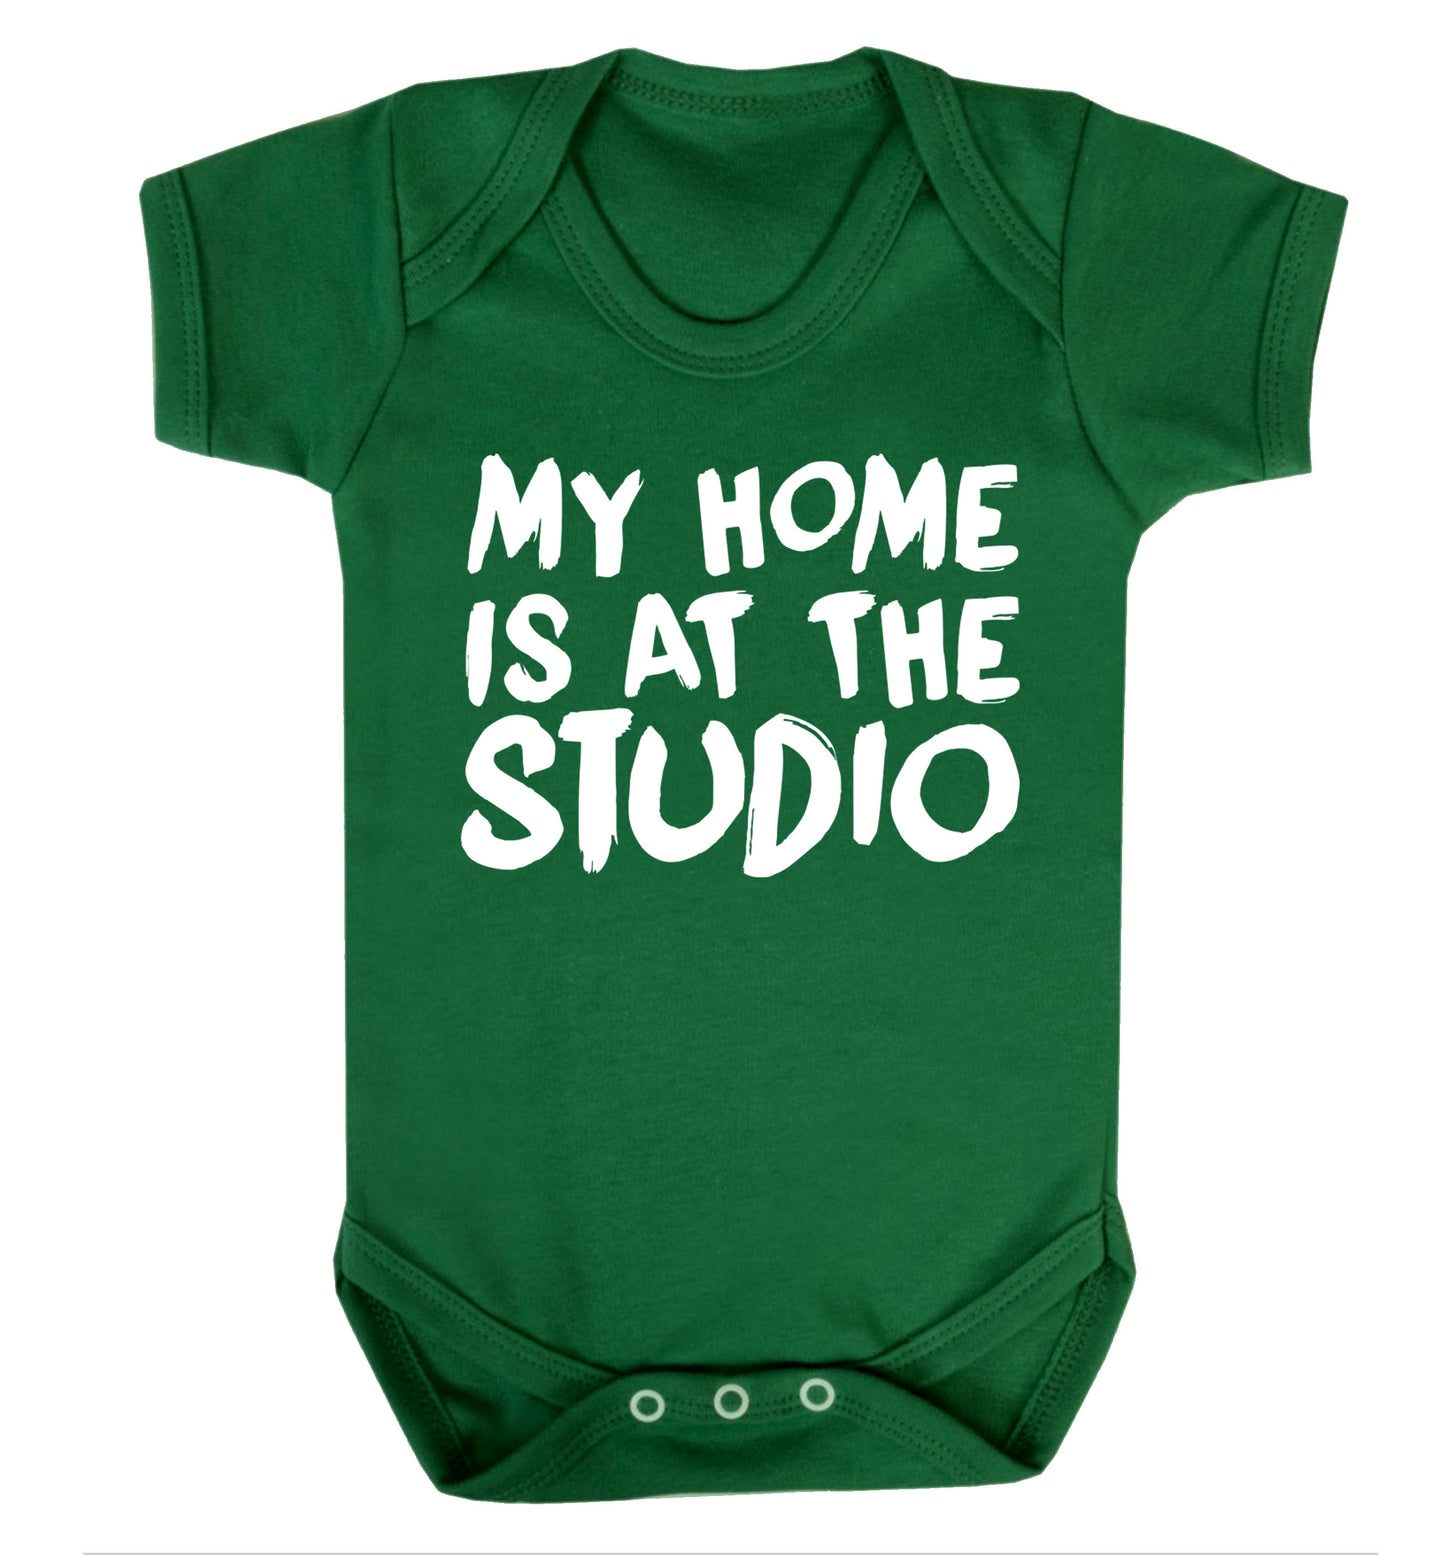 My home is at the studio Baby Vest green 18-24 months